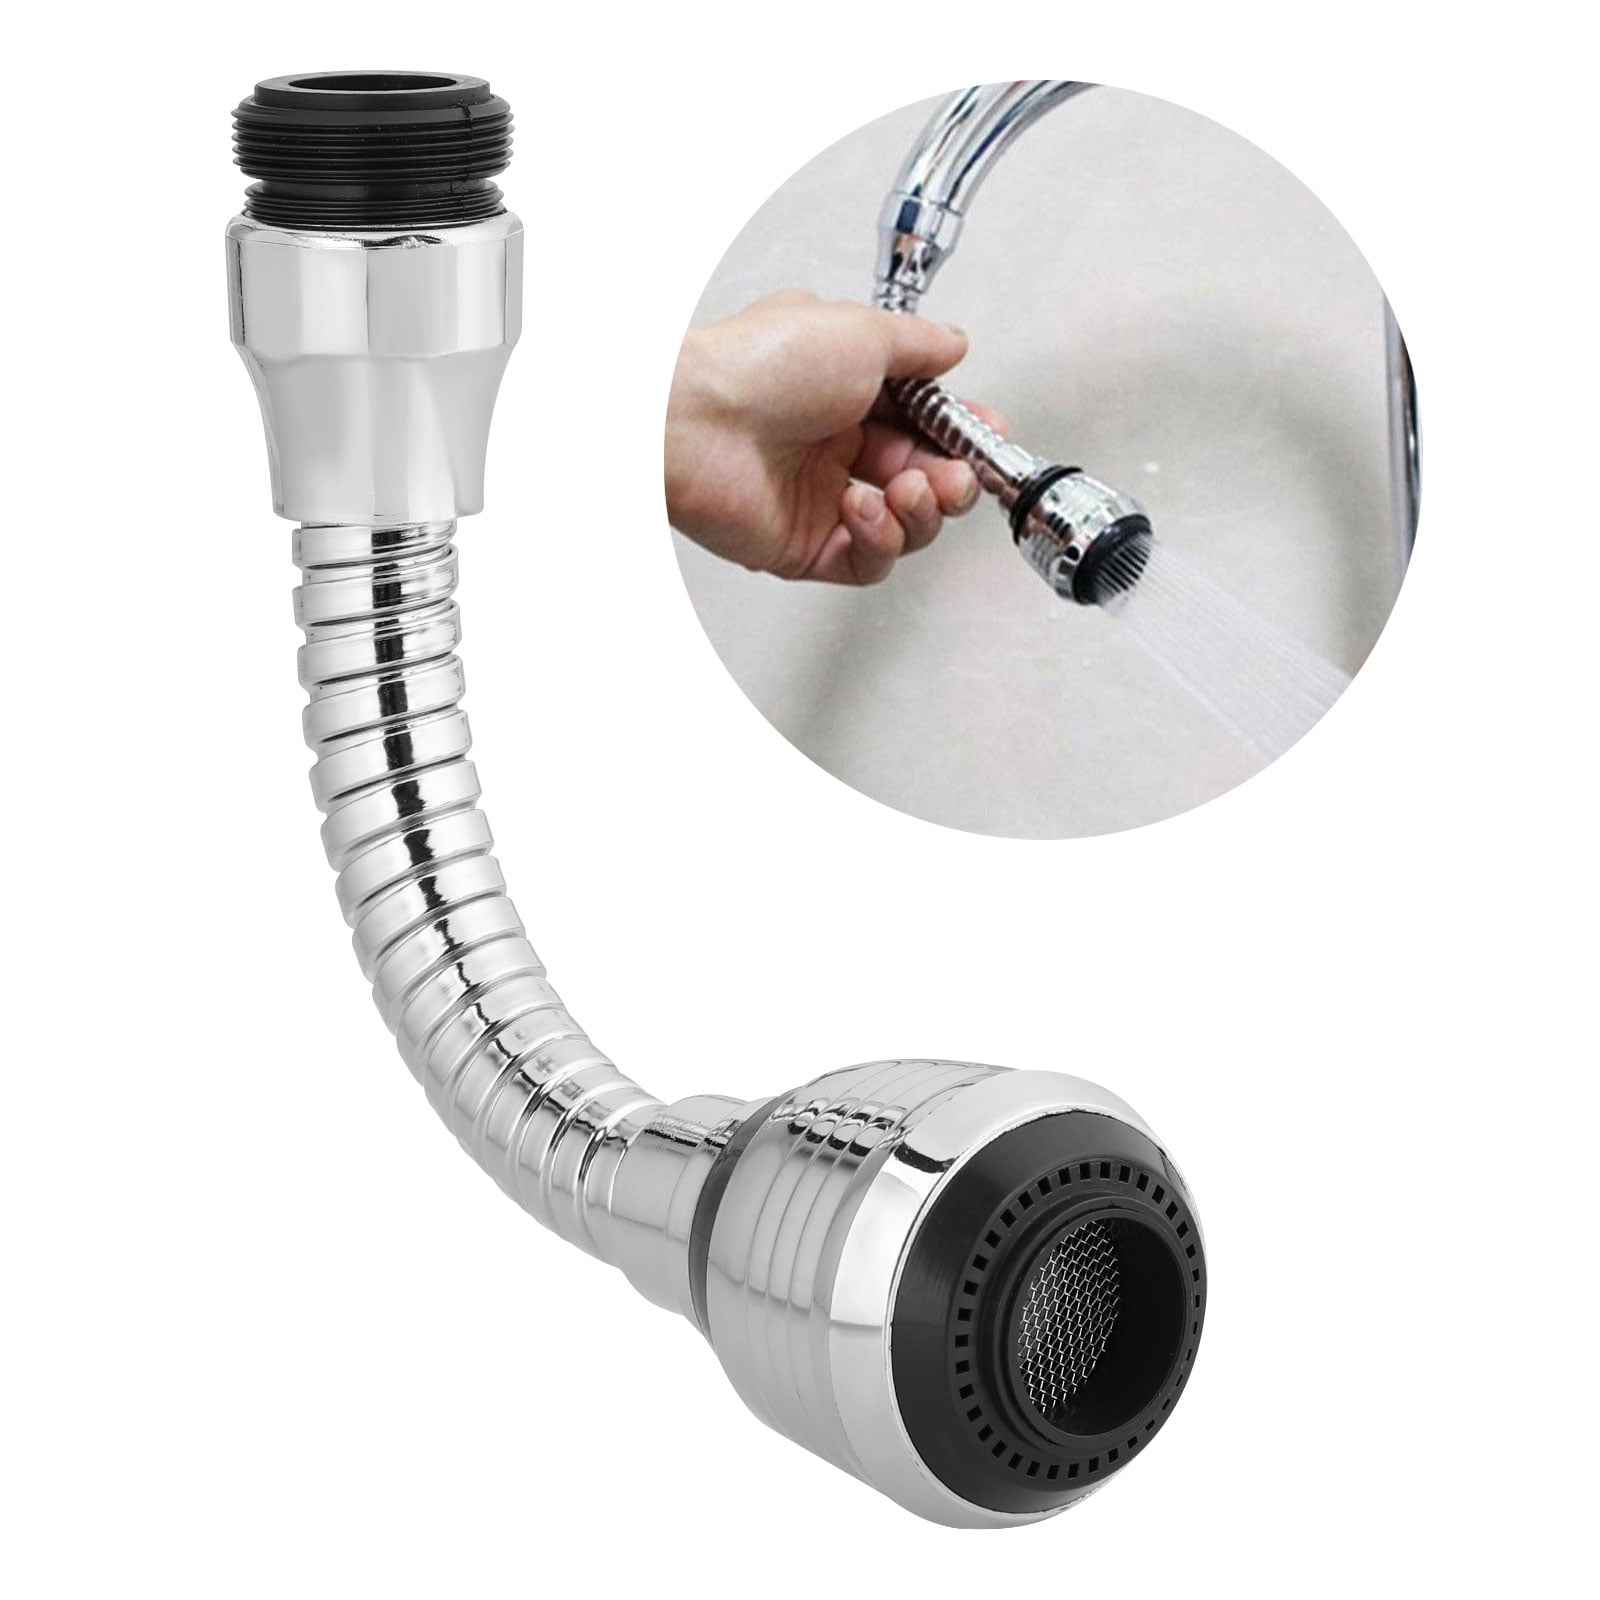 Yundap Home Kitchen Sink Tap Faucet Extender 360 Degree Rotary Water Sprinkler Nozzle Spray Shower Head Water Tap Tool For Home Kitchen Household Walmart Canada